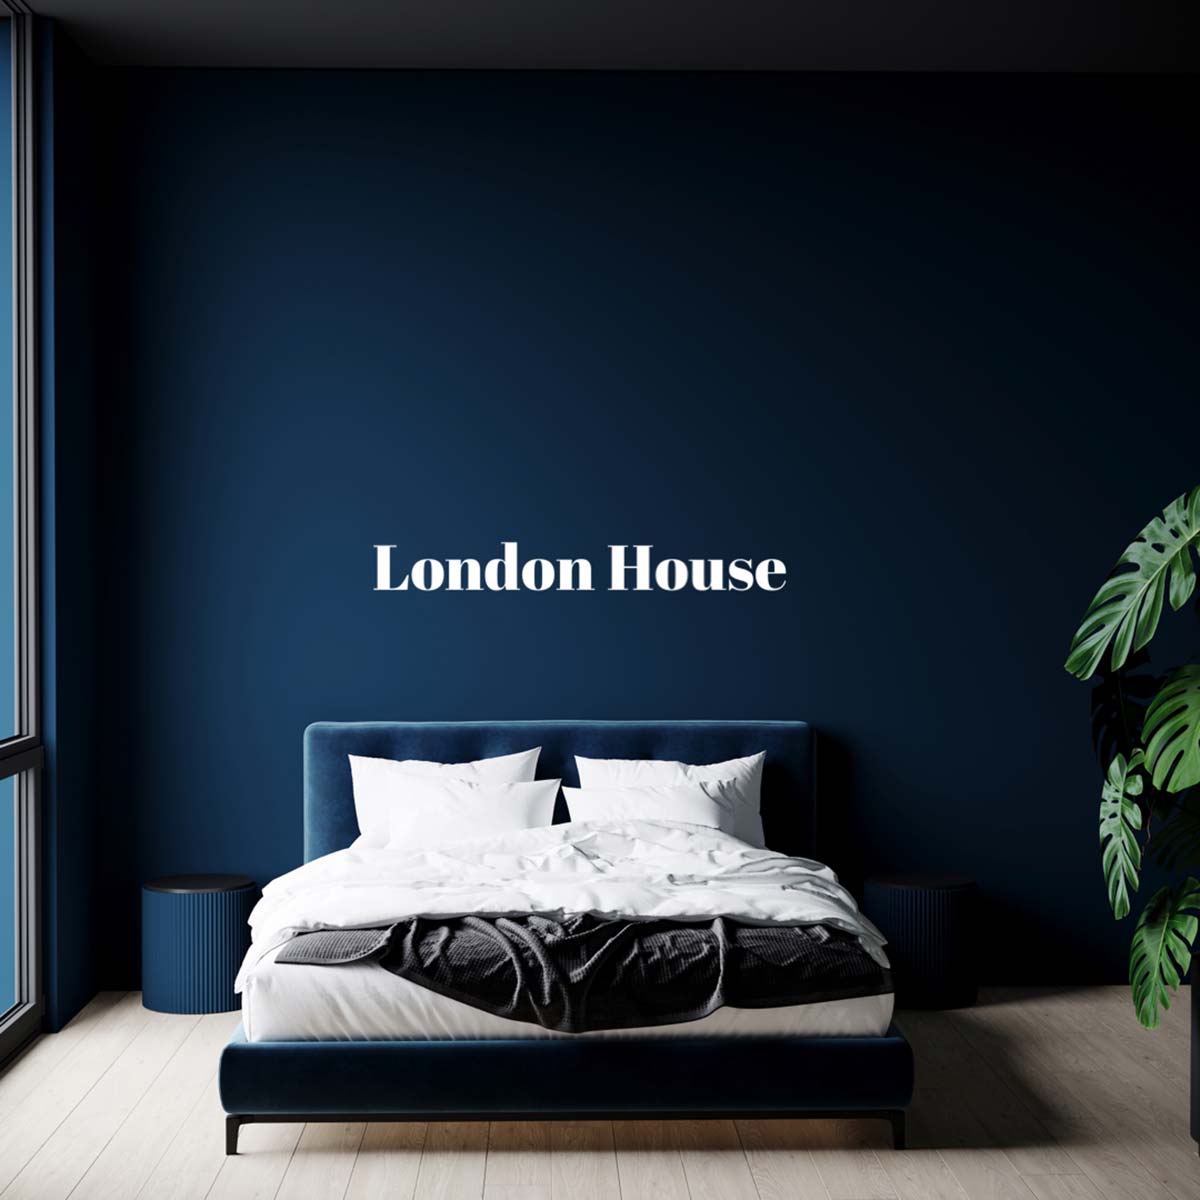 London house by Tonester